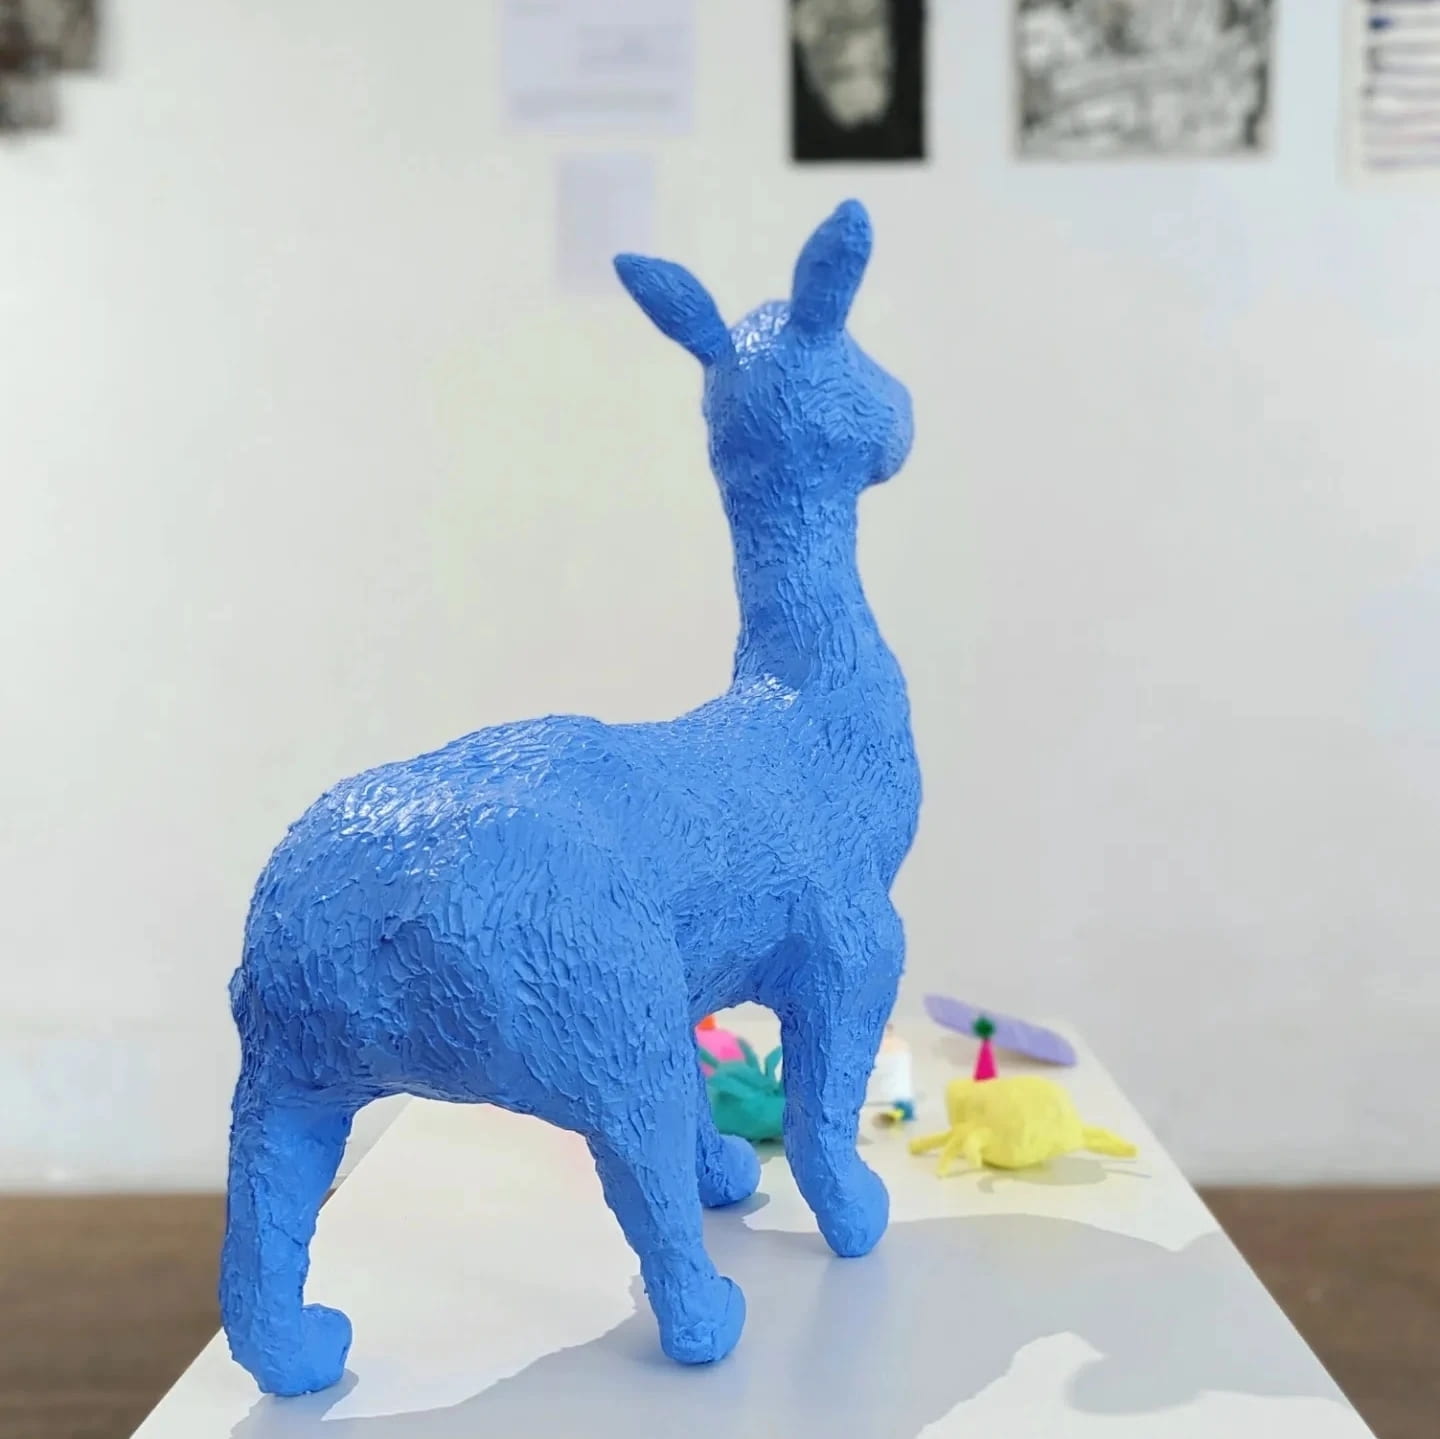 sculpture of a hybrid animal in bright blue